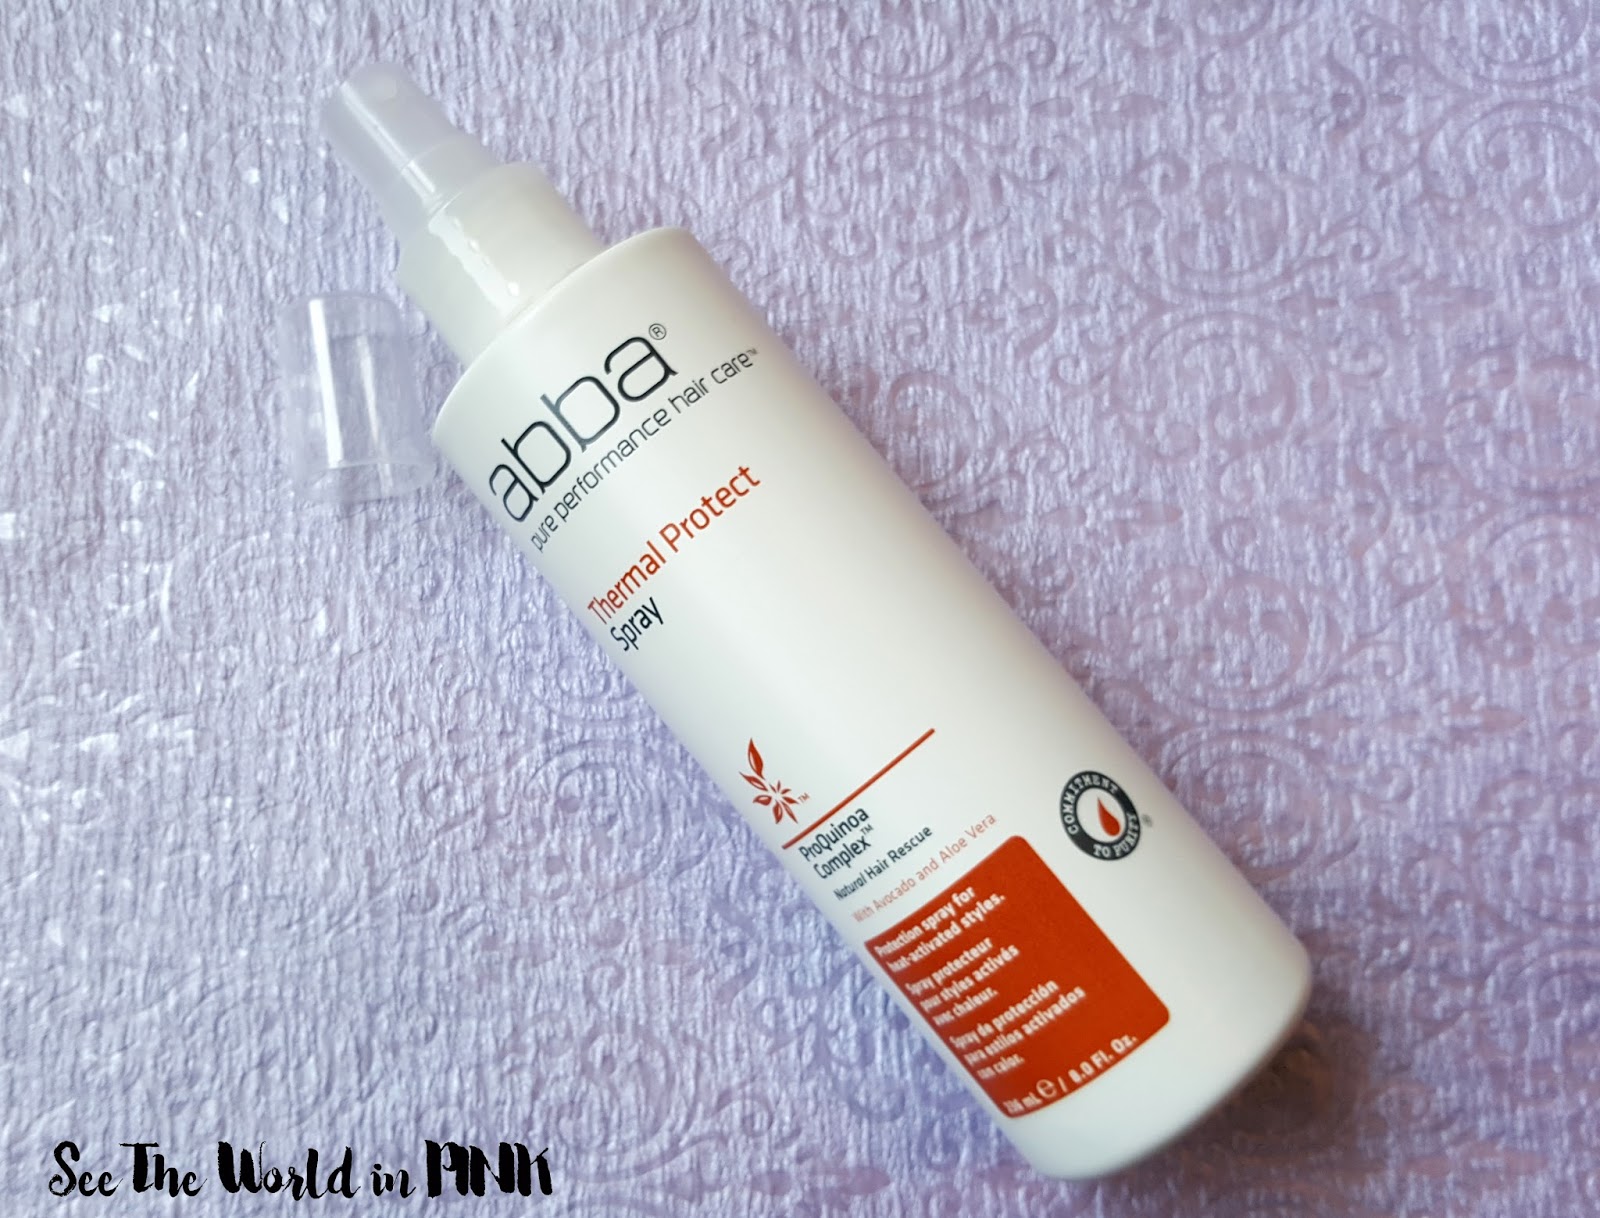 ABBA Hair Product Reviews - Moisture Shampoo & Conditioner and Thermal Protect Spray 